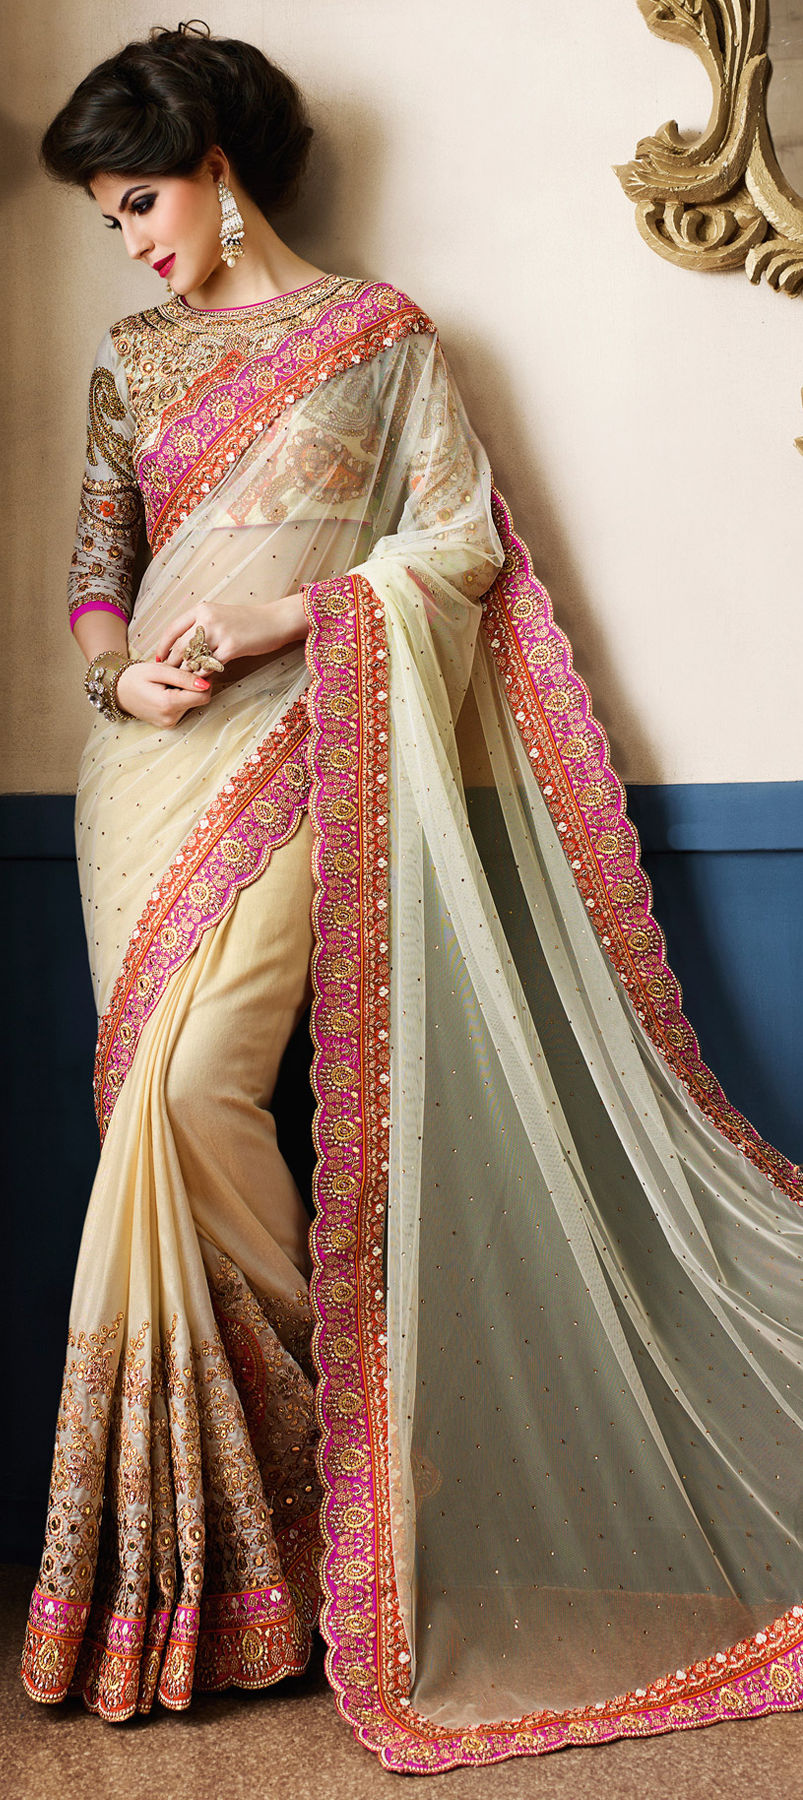 191019: Beige and Brown color family Bridal Wedding Sarees,Party Wear